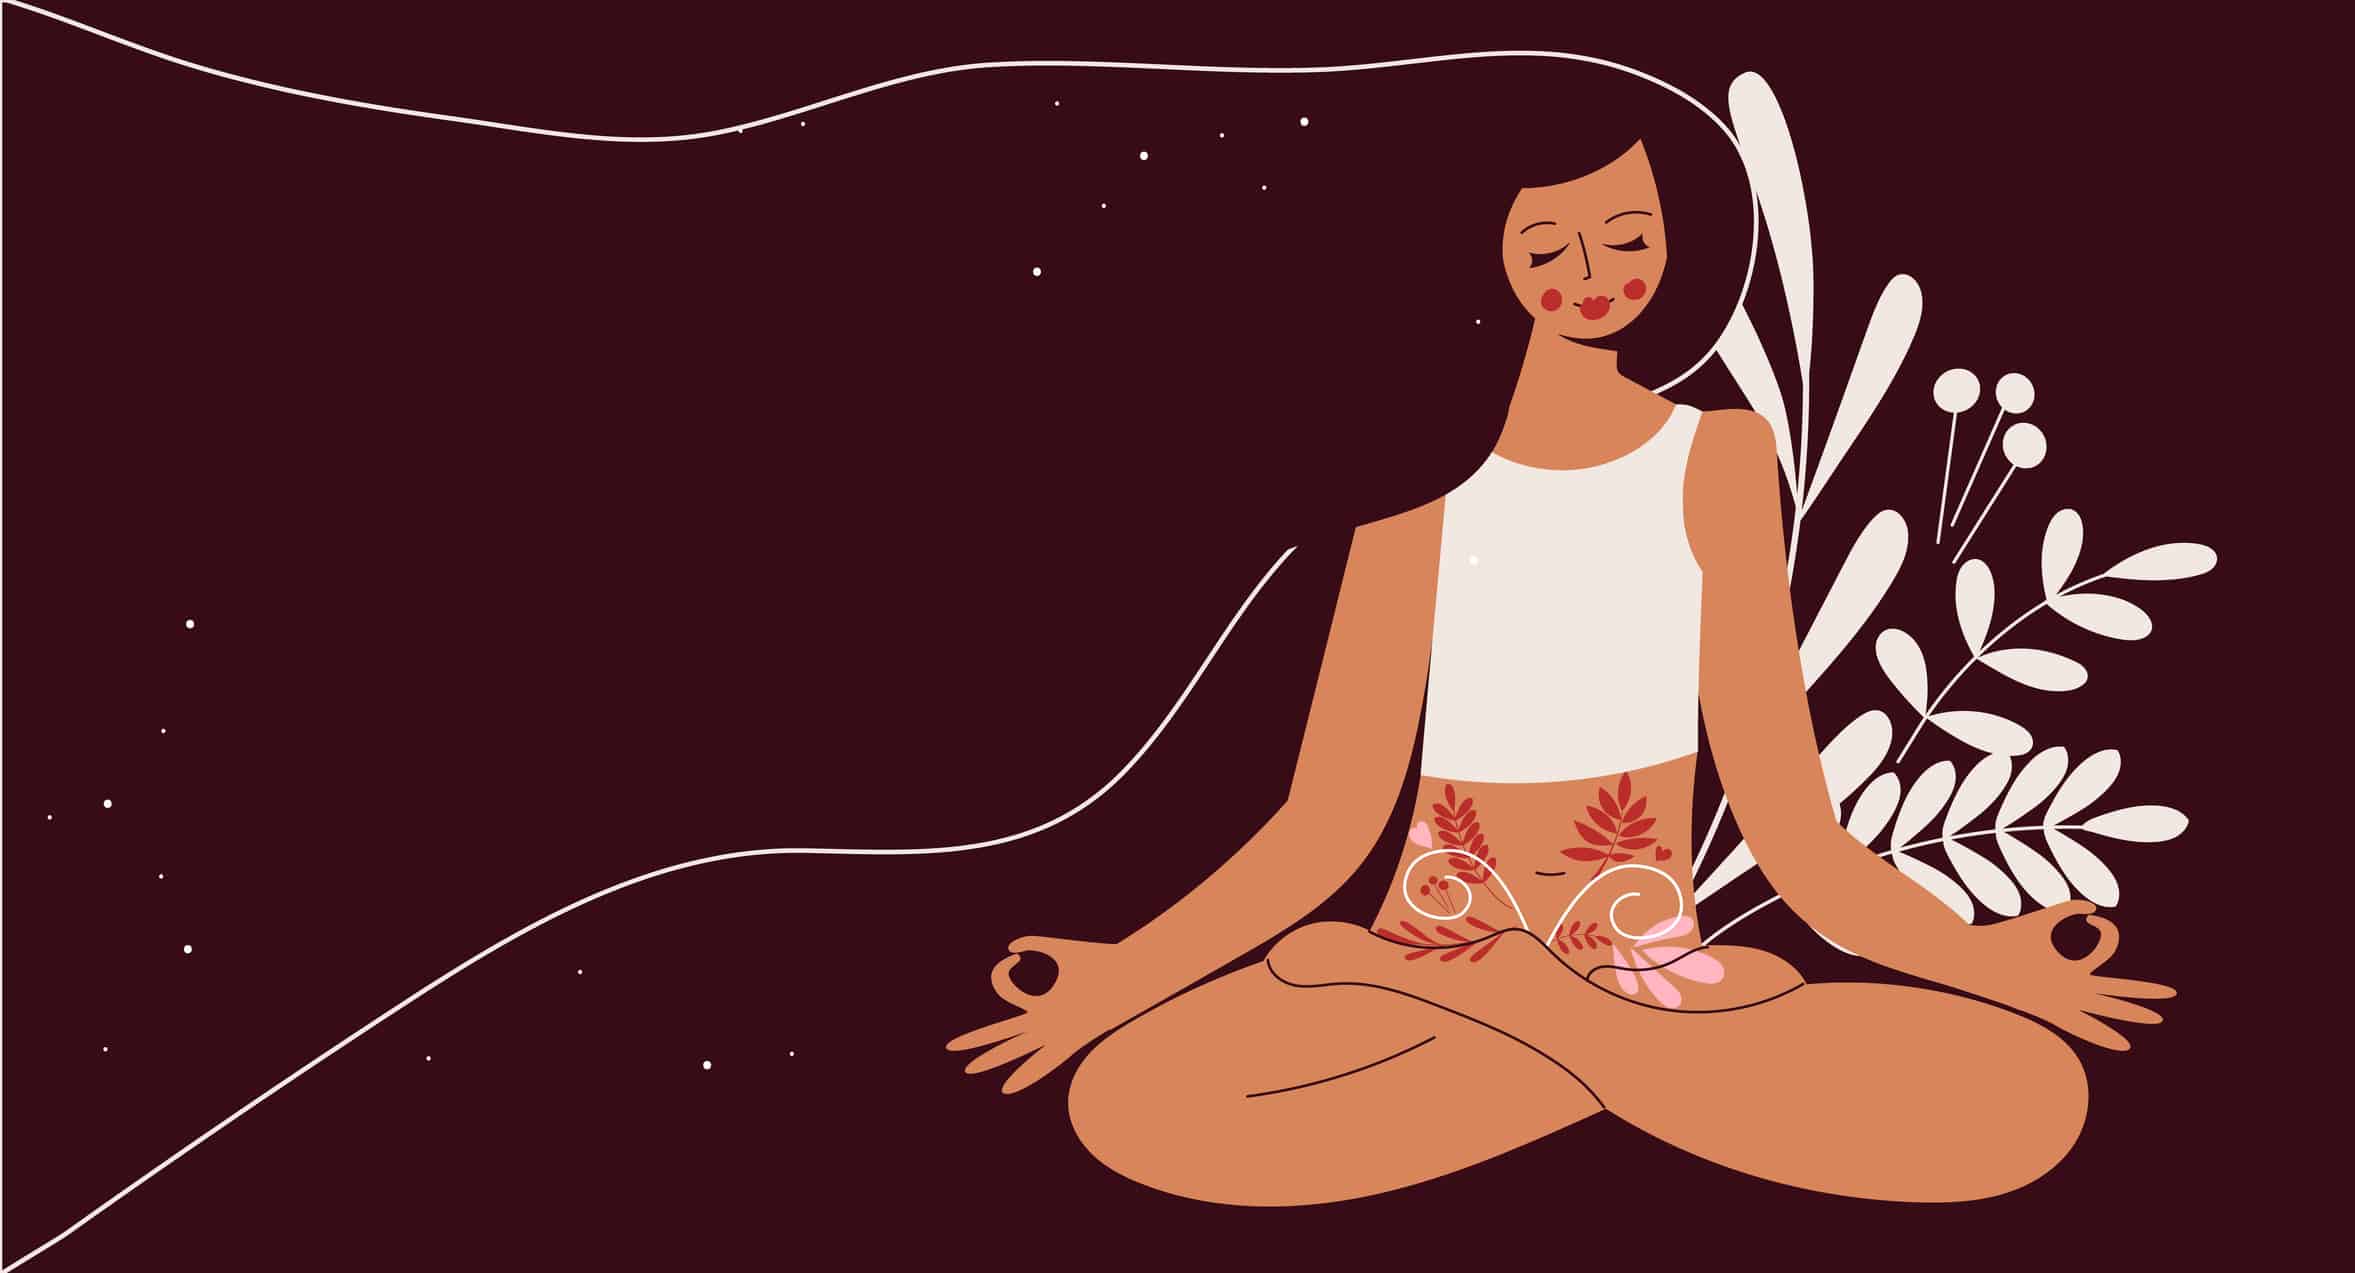 A cartoon image of a girl in a meditation pose with flowers around her stomach.